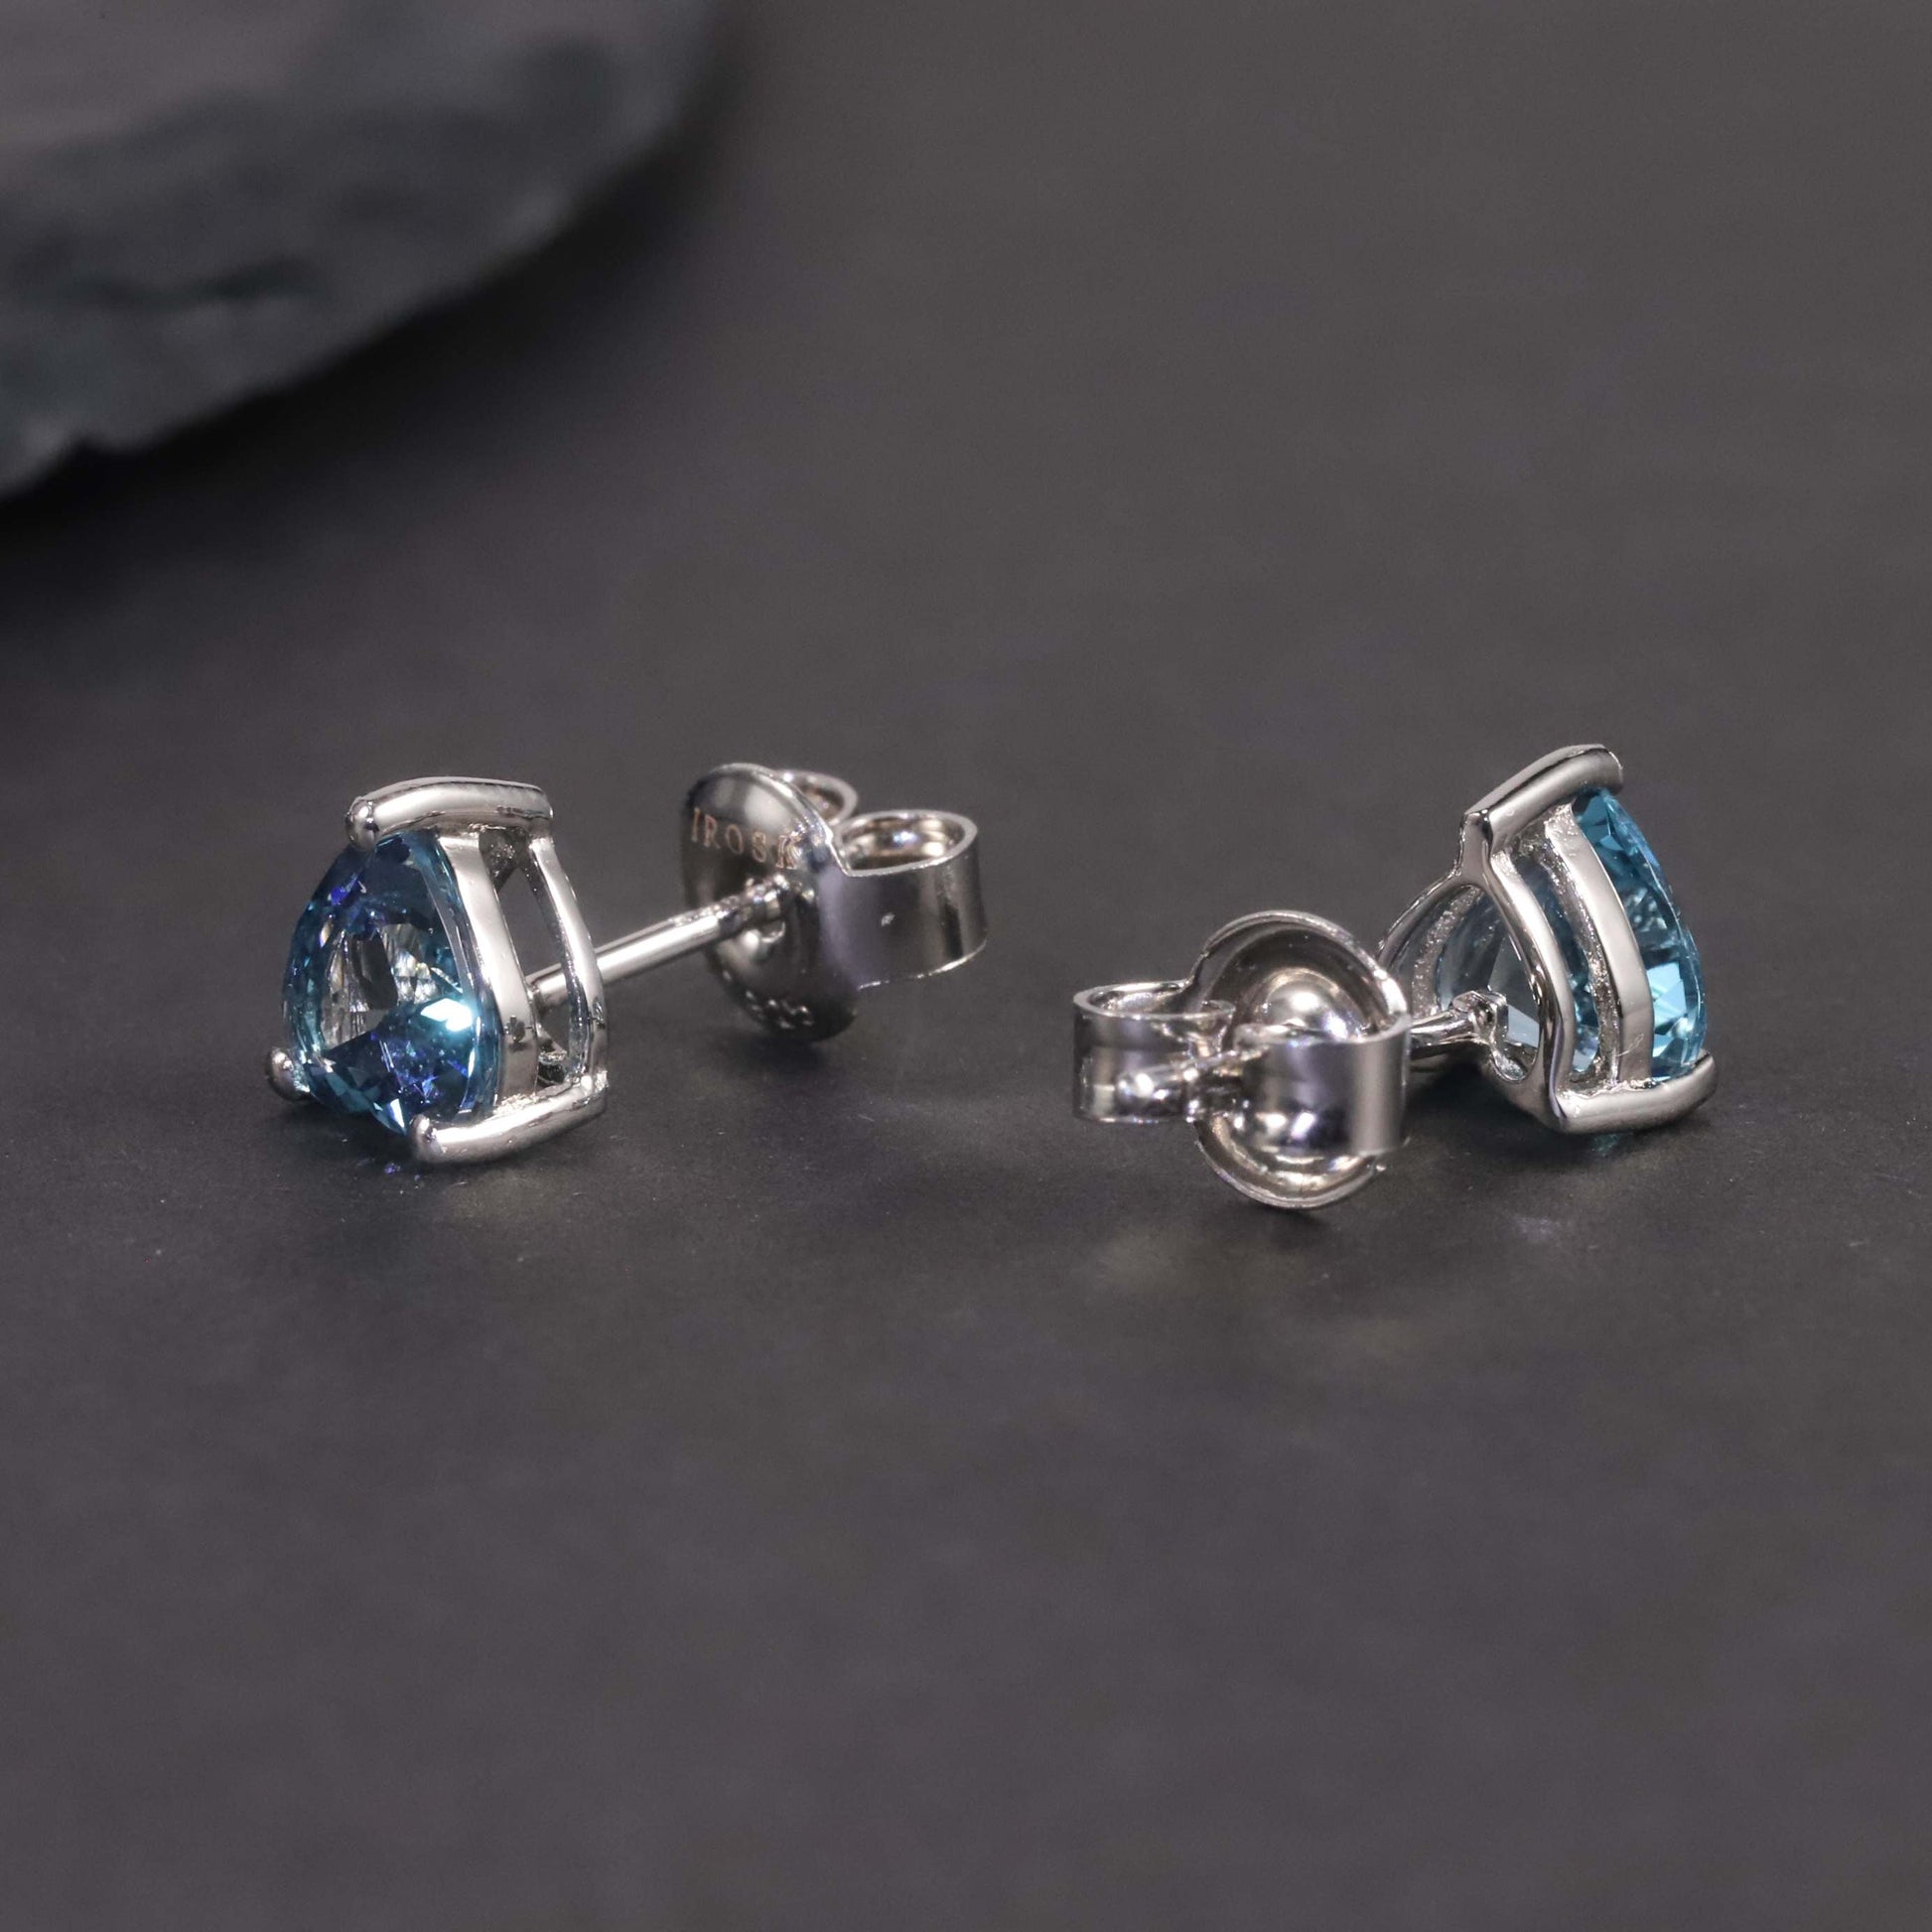 another view of lb topaz stud earrings on dark background